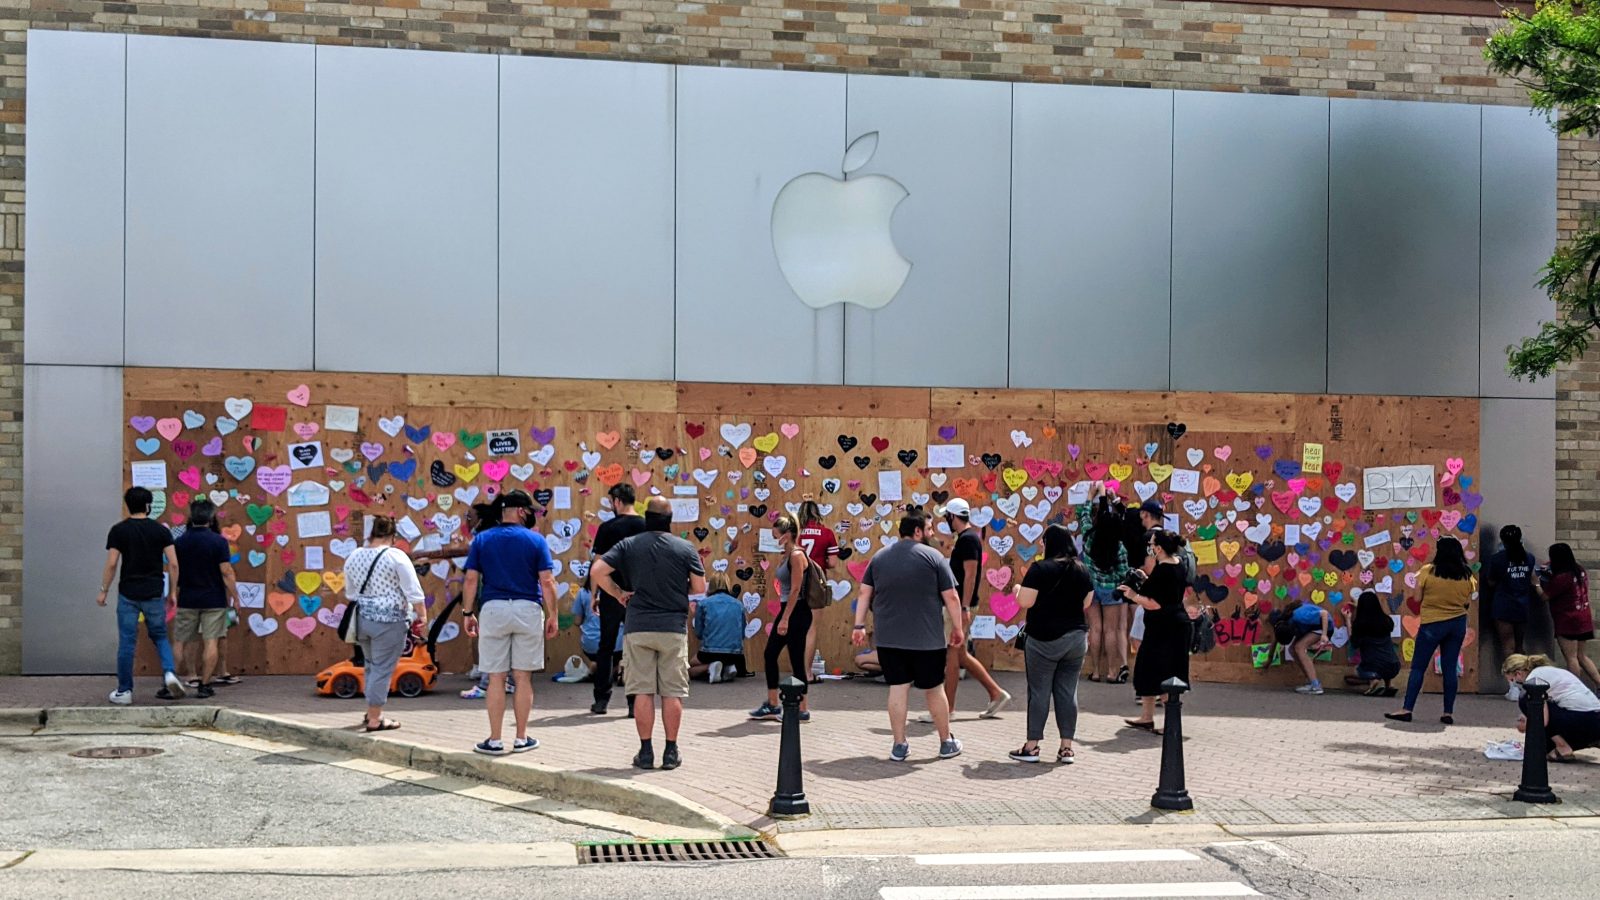 Apple permanently closes Minneapolis store, suffers fire at Las